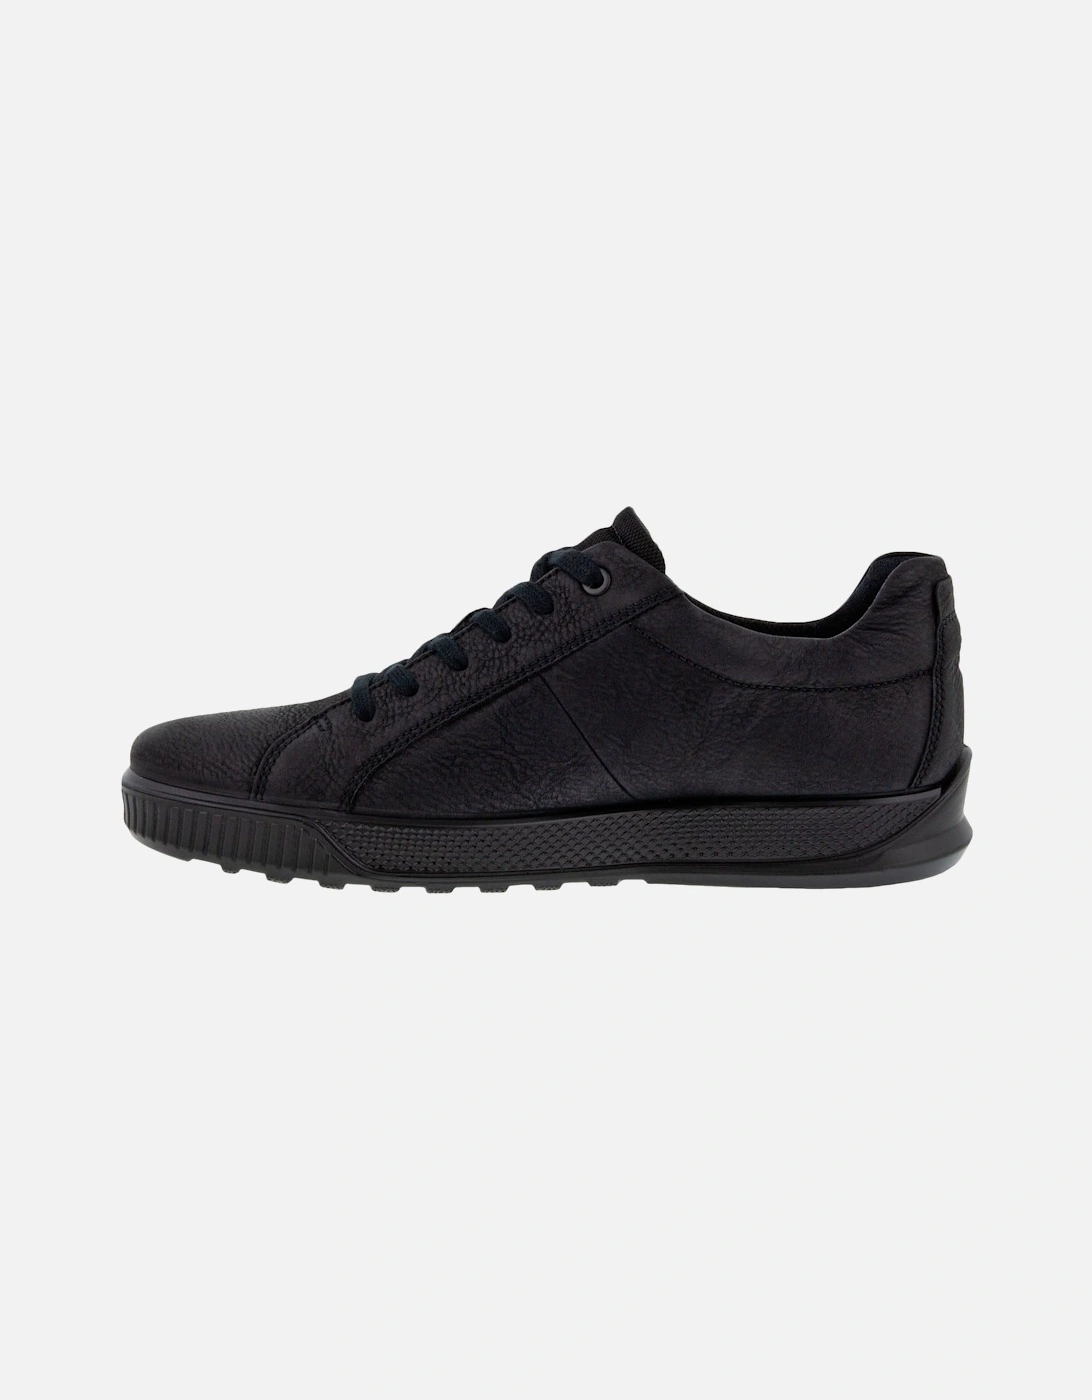 Mens Byway Leather Trainers - Black